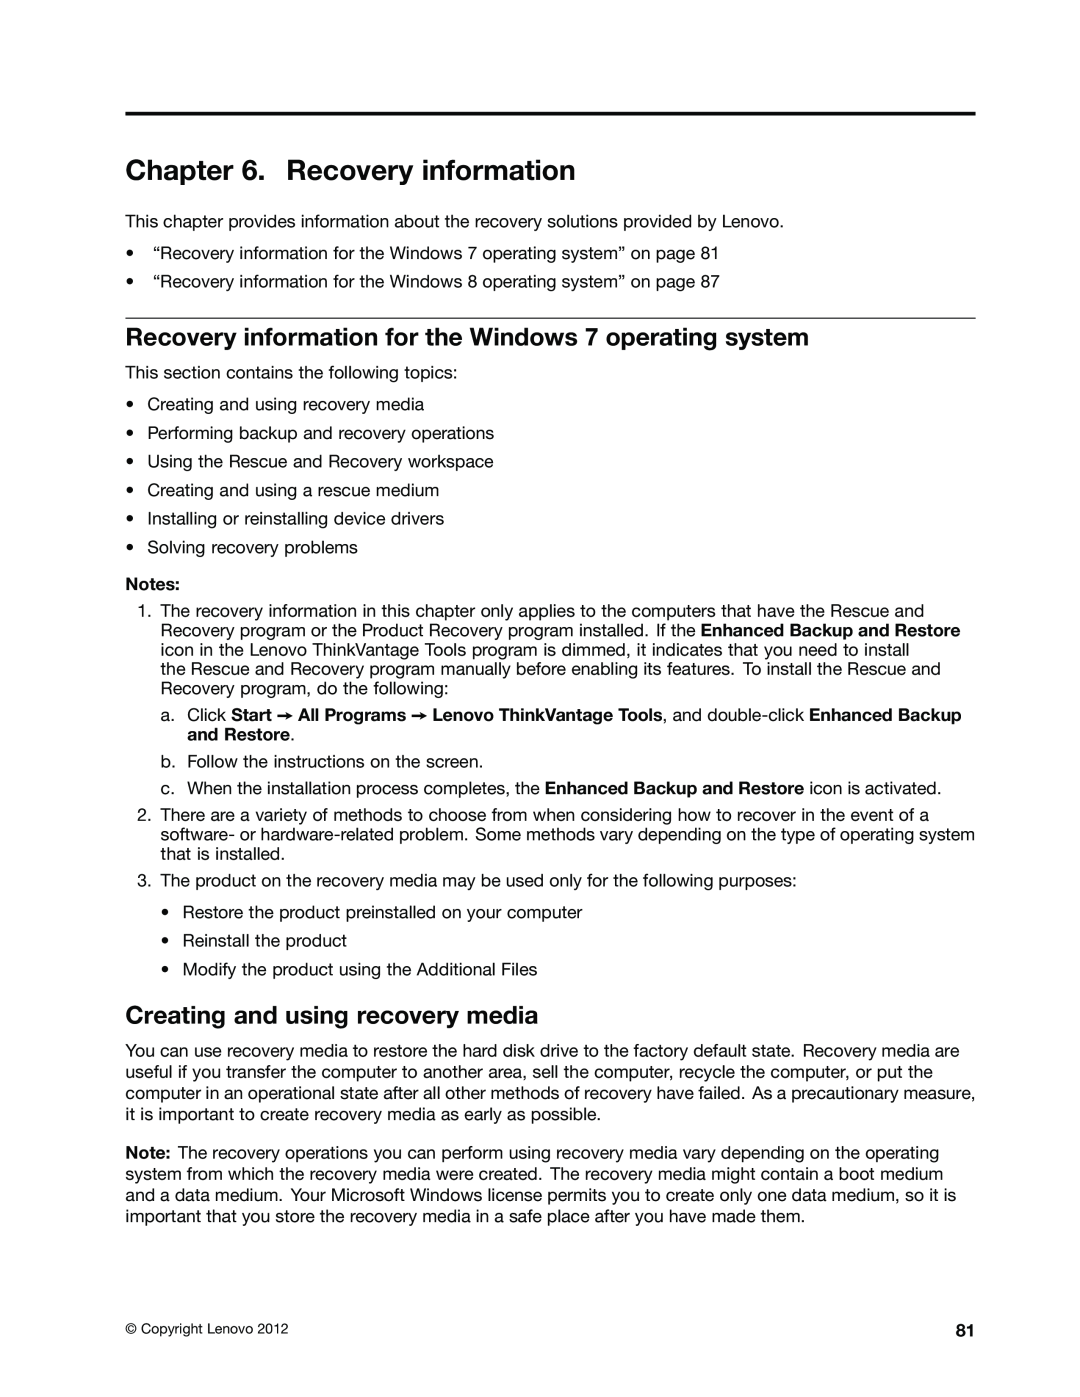 Lenovo 2011, 2112, 2111, 2110, 1663, 1565, 1662, 1562, 1766, 1765 Recovery information, Creating and using recovery media, Notes 